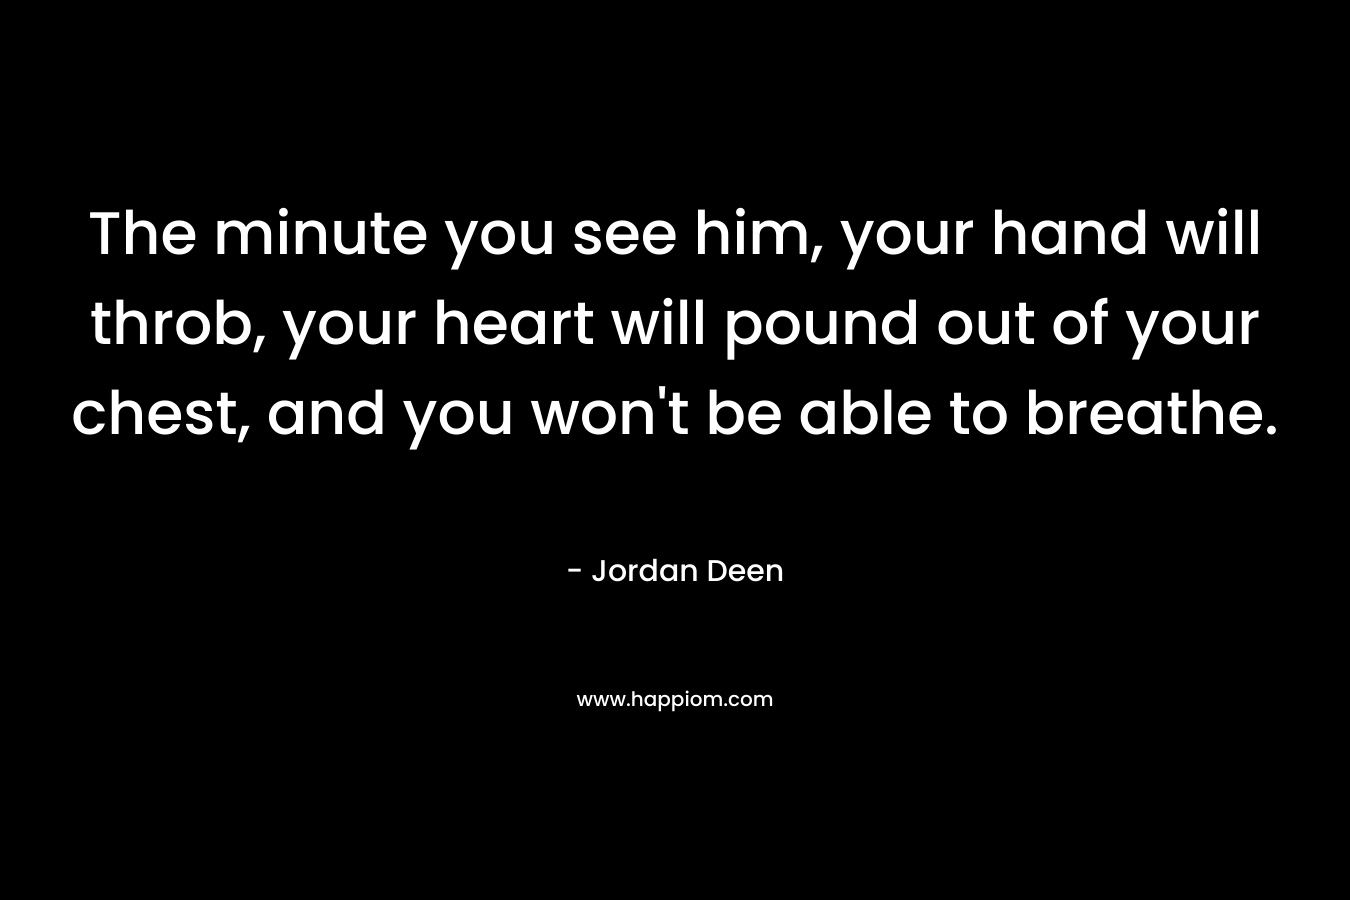 The minute you see him, your hand will throb, your heart will pound out of your chest, and you won’t be able to breathe. – Jordan Deen